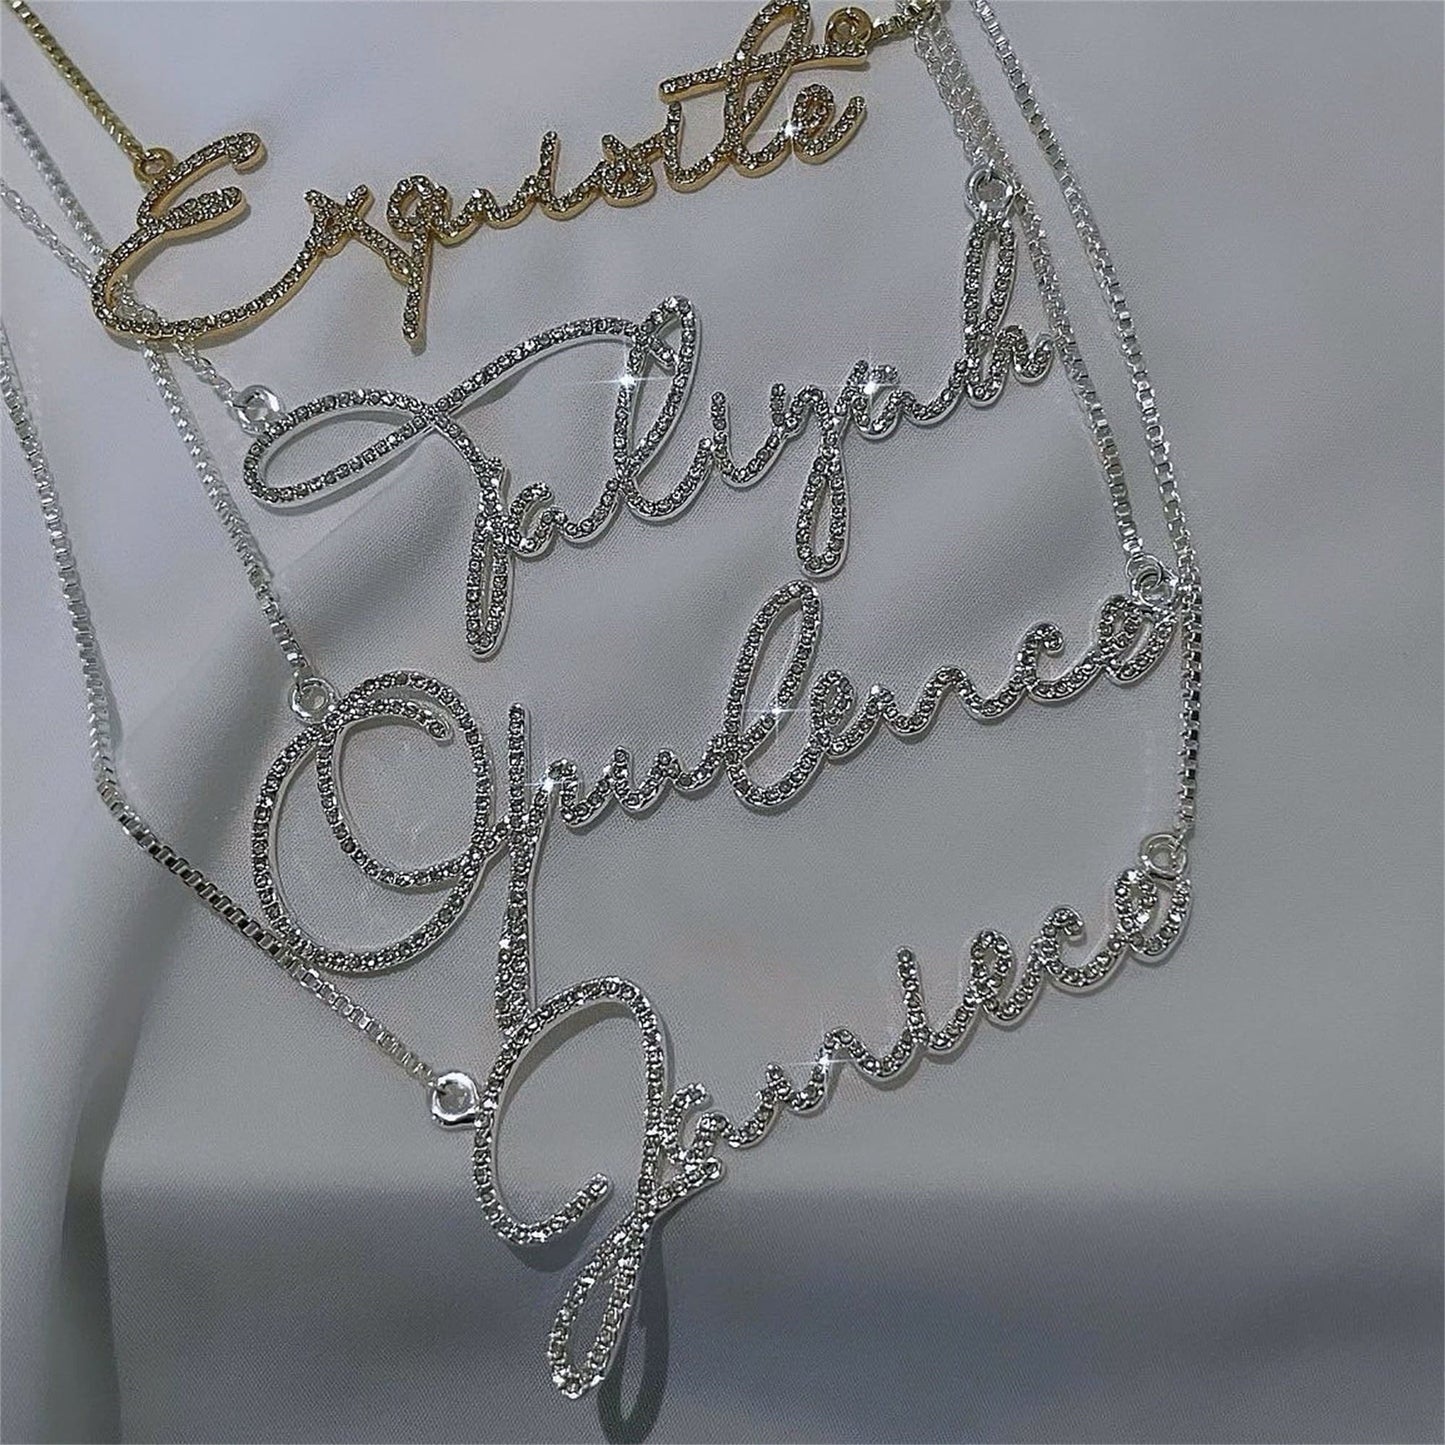 Custom Crystal Name Necklace - Drip lordss